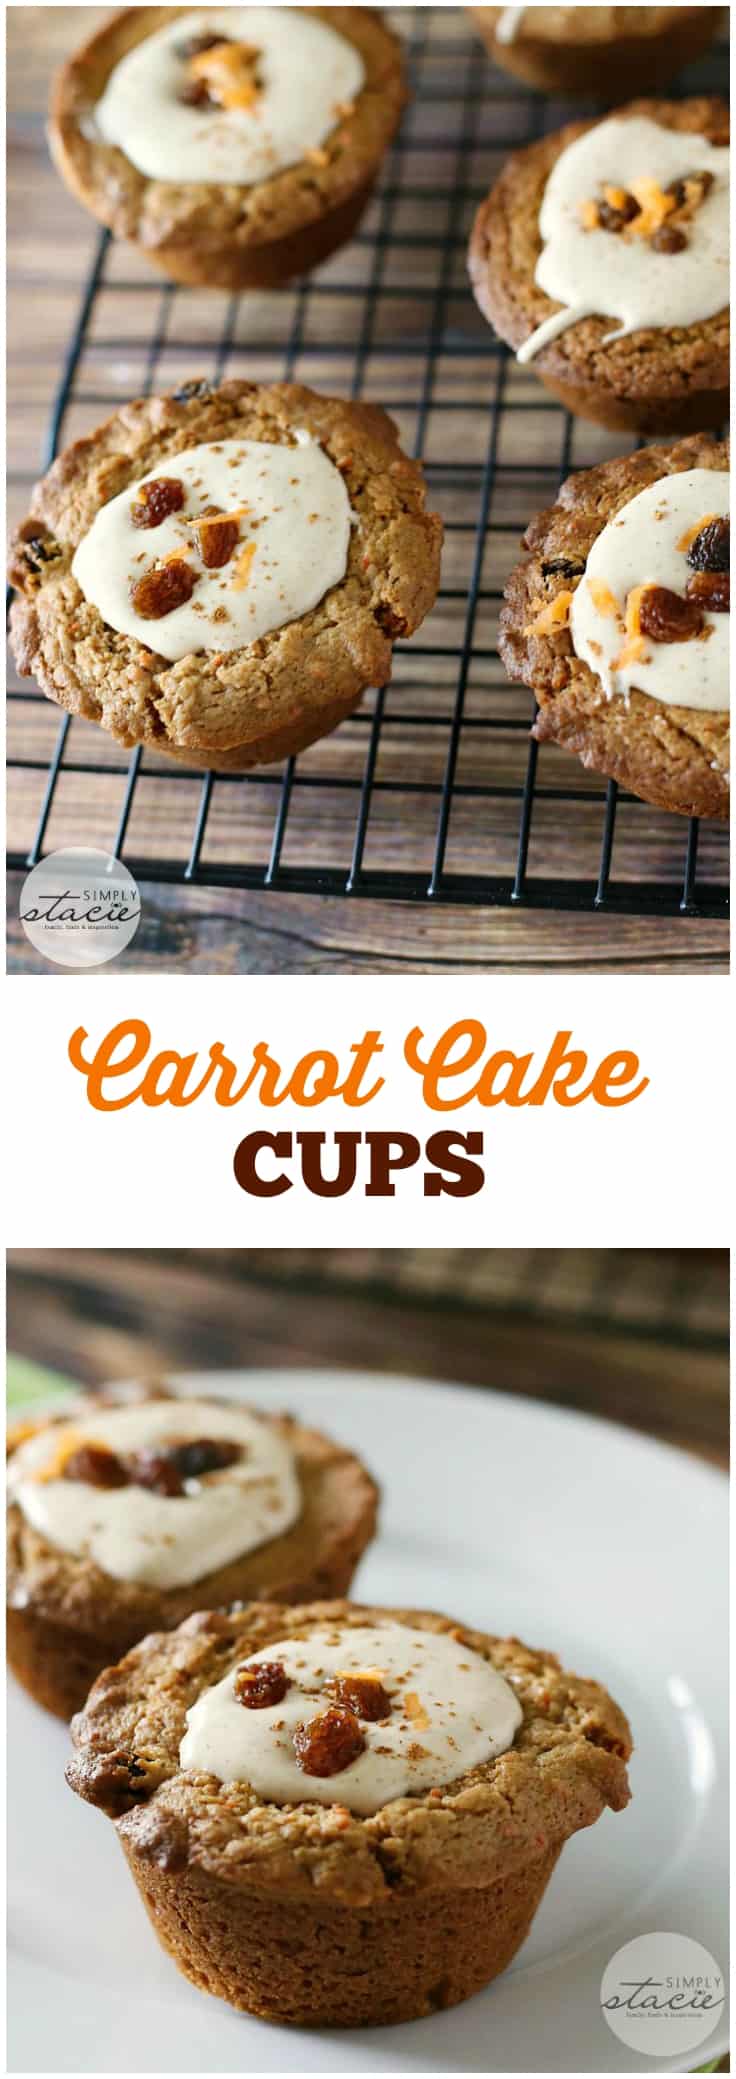 Carrot Cake Cups - The perfect fall dessert! These delightful cake cups are filled with cream cheese frosting for one decadent bite.